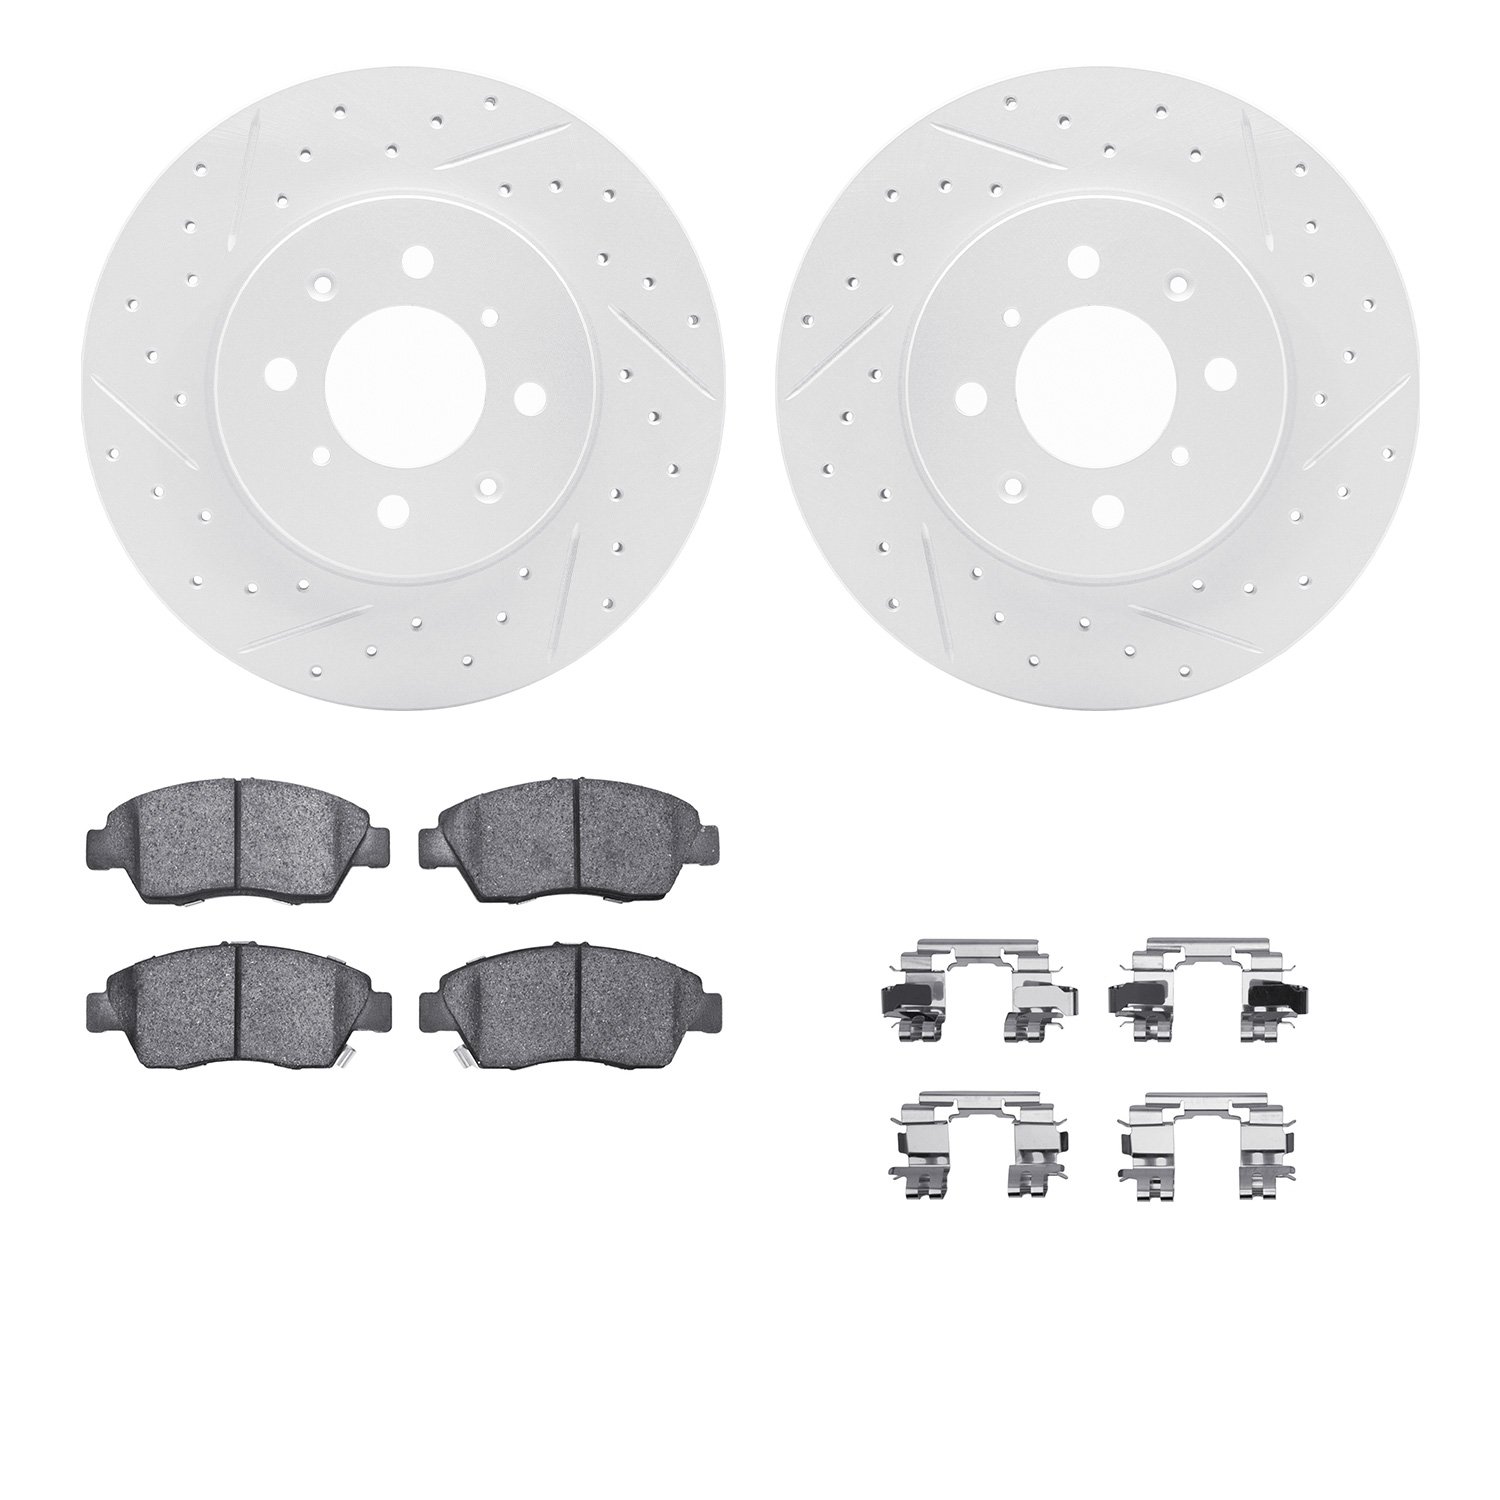 2512-59009 Geoperformance Drilled/Slotted Rotors w/5000 Advanced Brake Pads Kit & Hardware, 1993-1997 Acura/Honda, Position: Fro